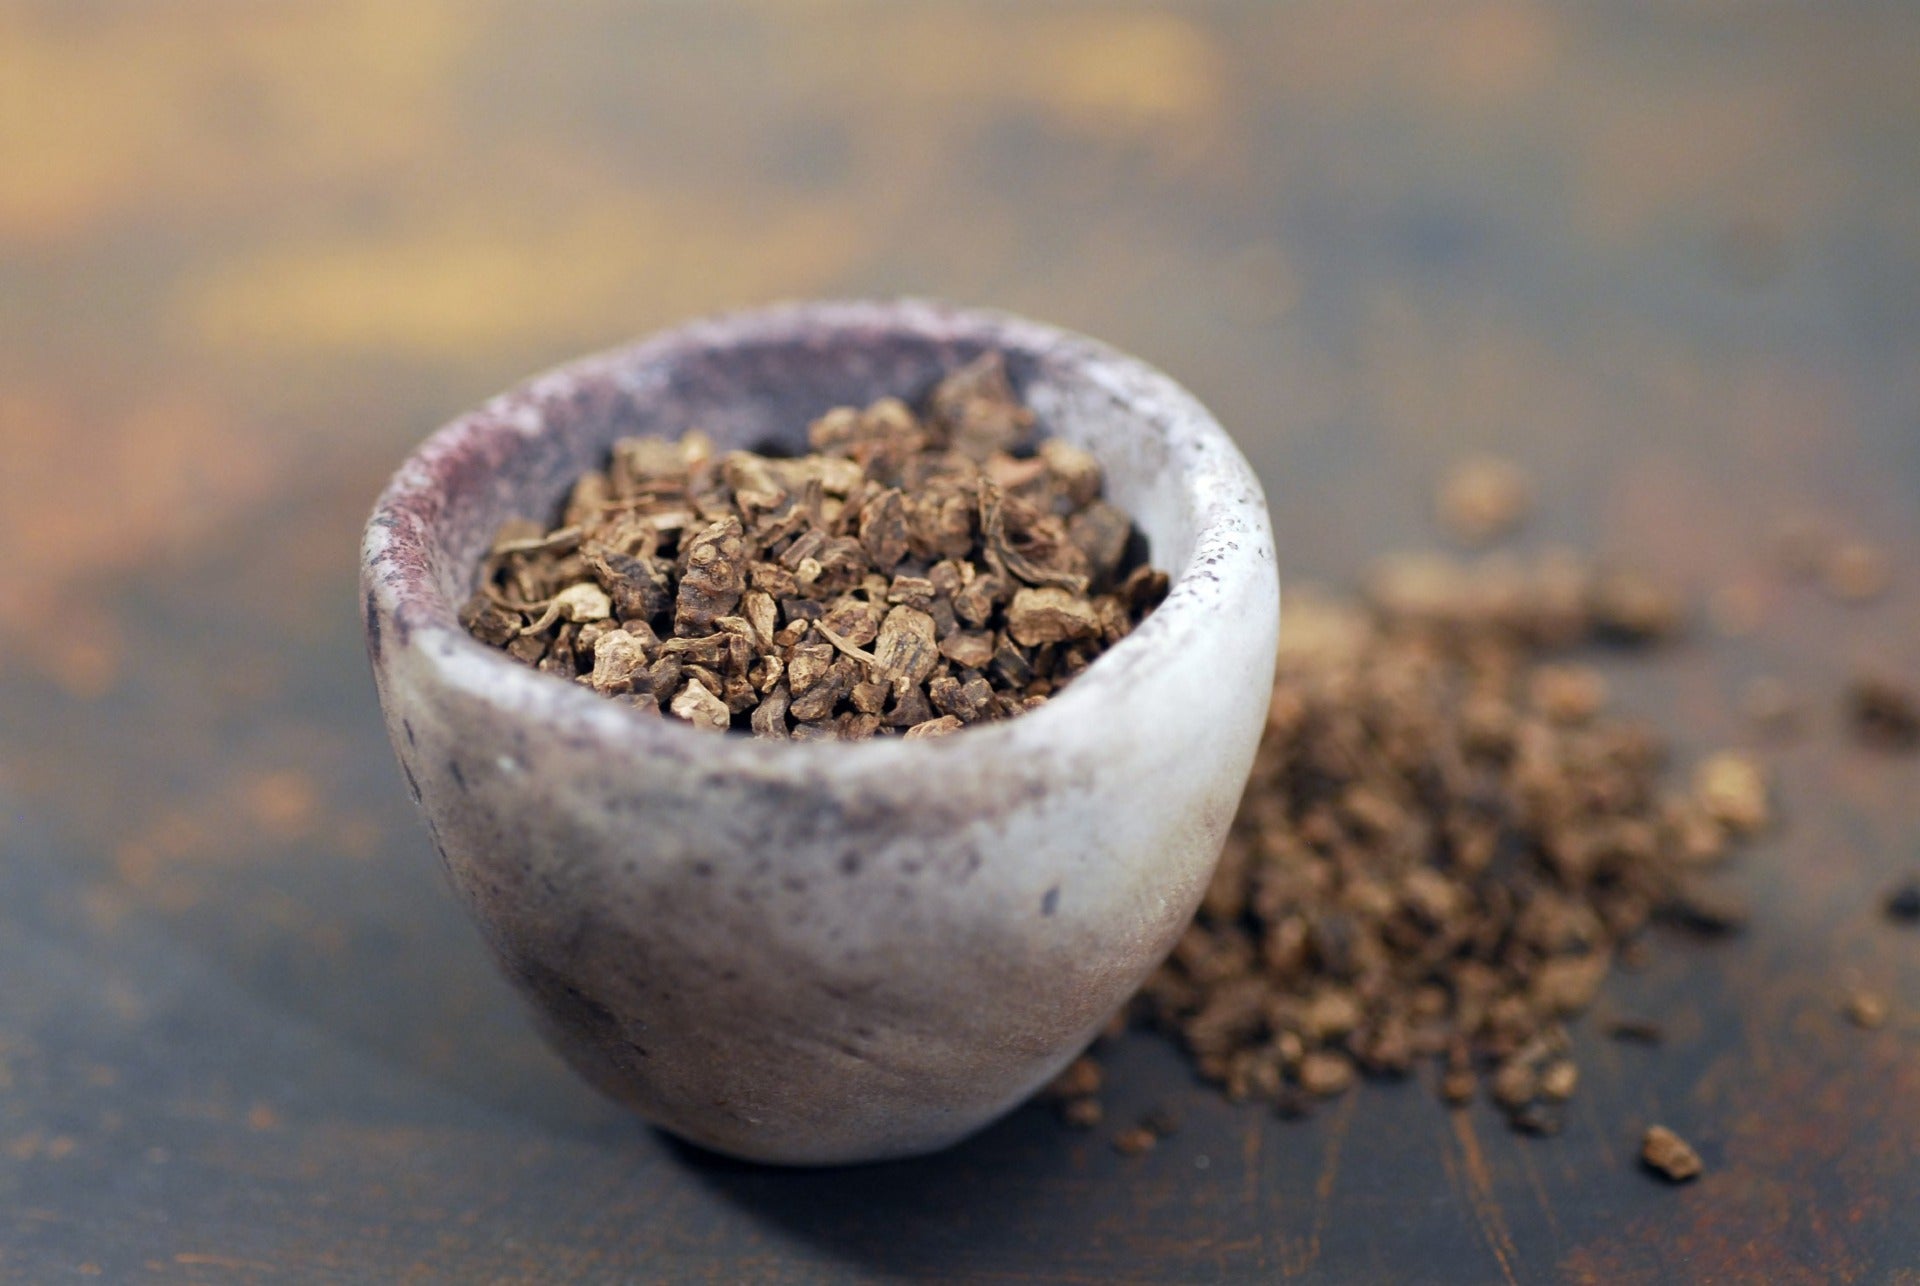 Dried valerian root pieces in a small stone bowl.